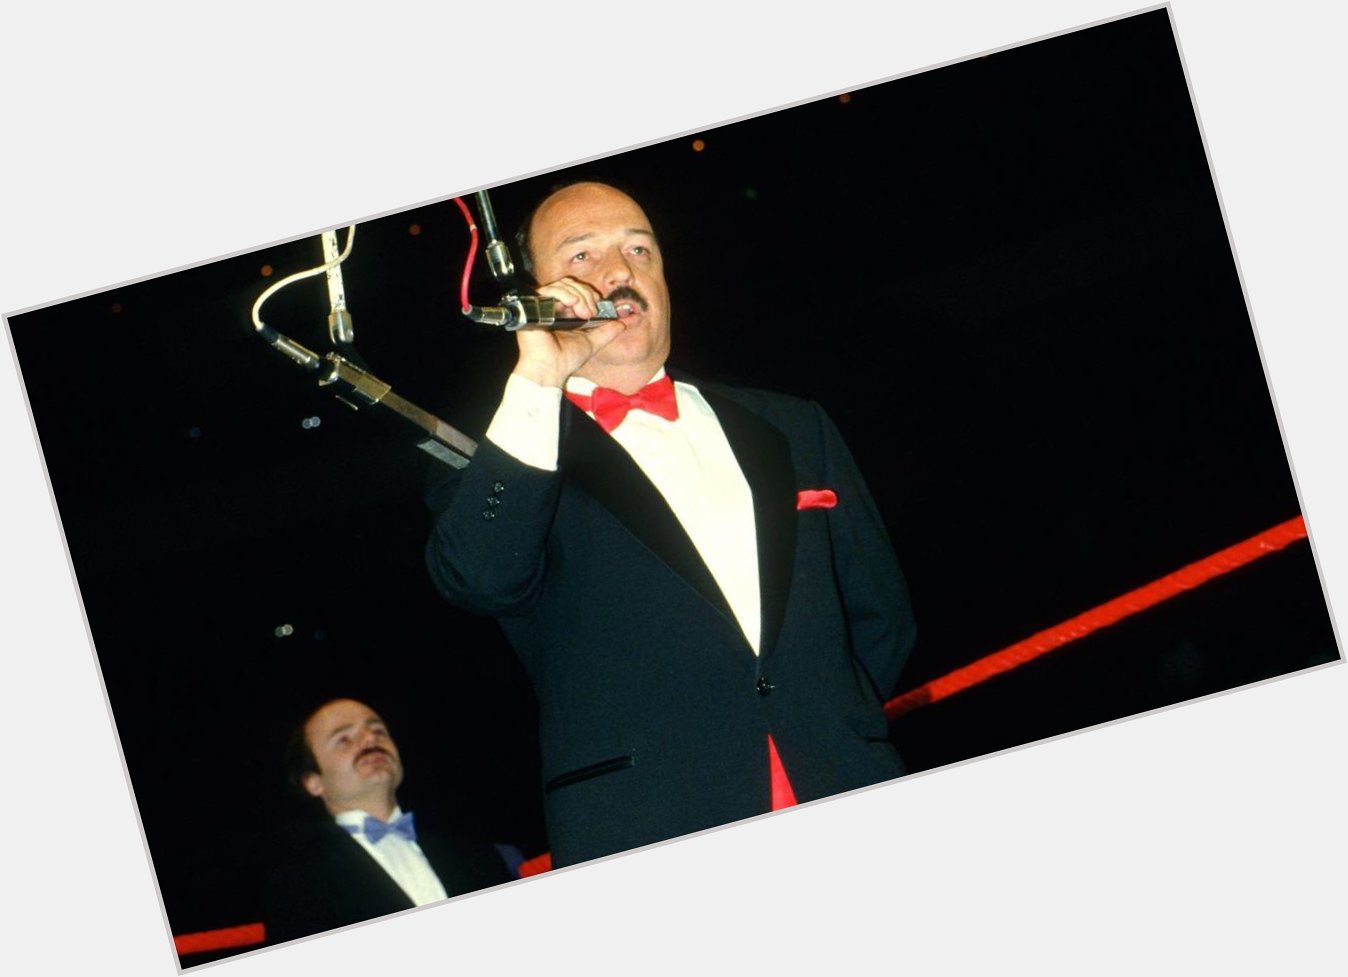 Happy 76th Birthday to one of the most iconic announcers of all time, Mean Gene Okerlund! 